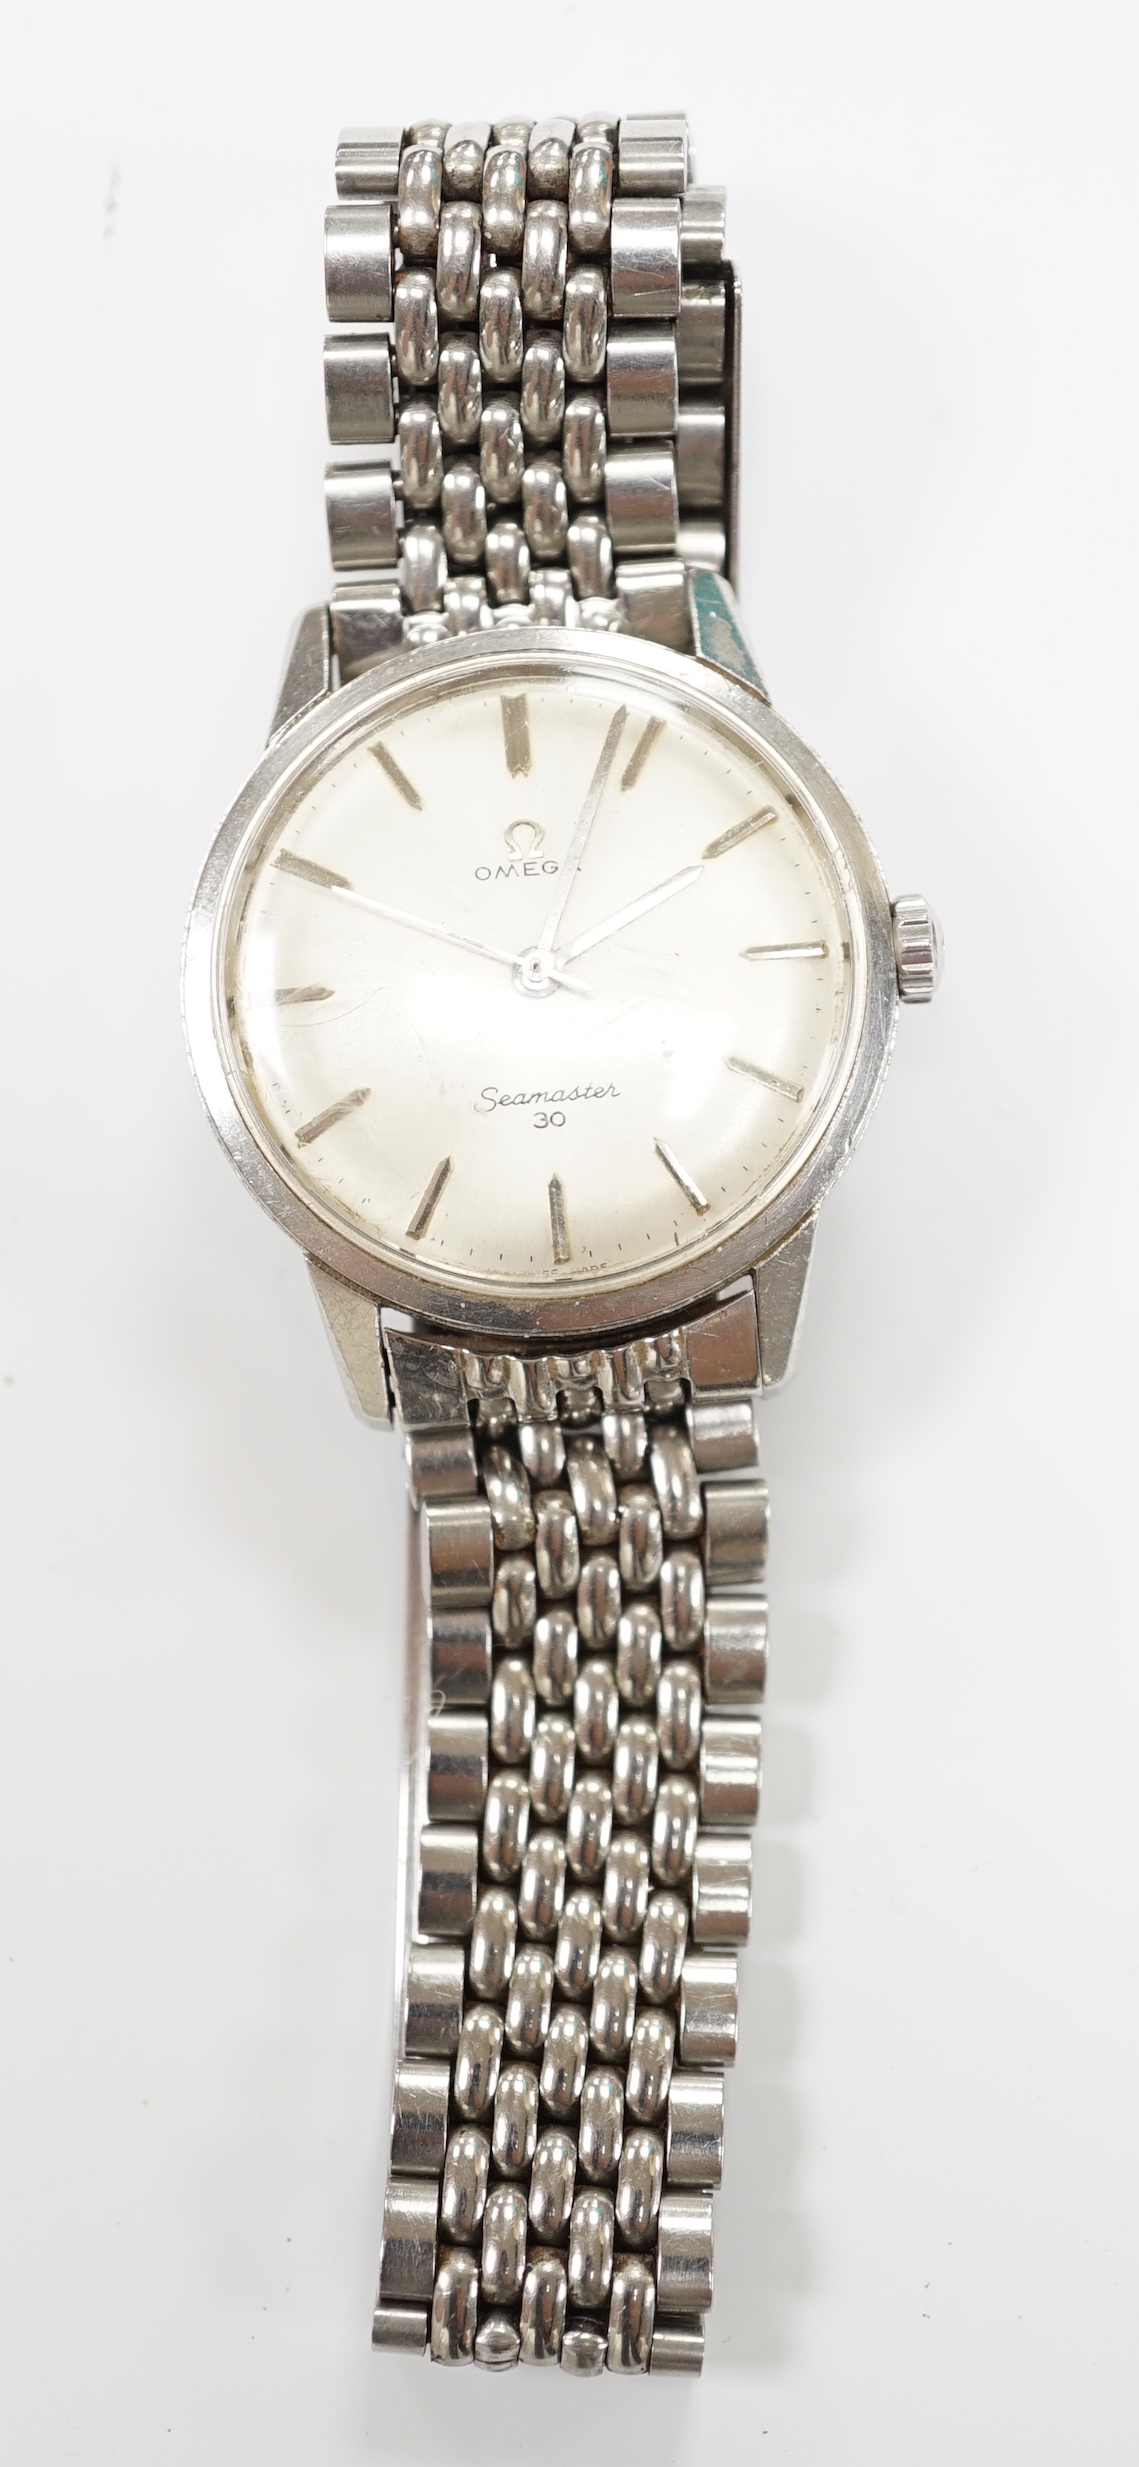 A gentleman's stainless steel Omega Seamaster 30 manual wind wrist watch, on a stainless steel Omega bracelet, case diameter 35mm, no box or papers.